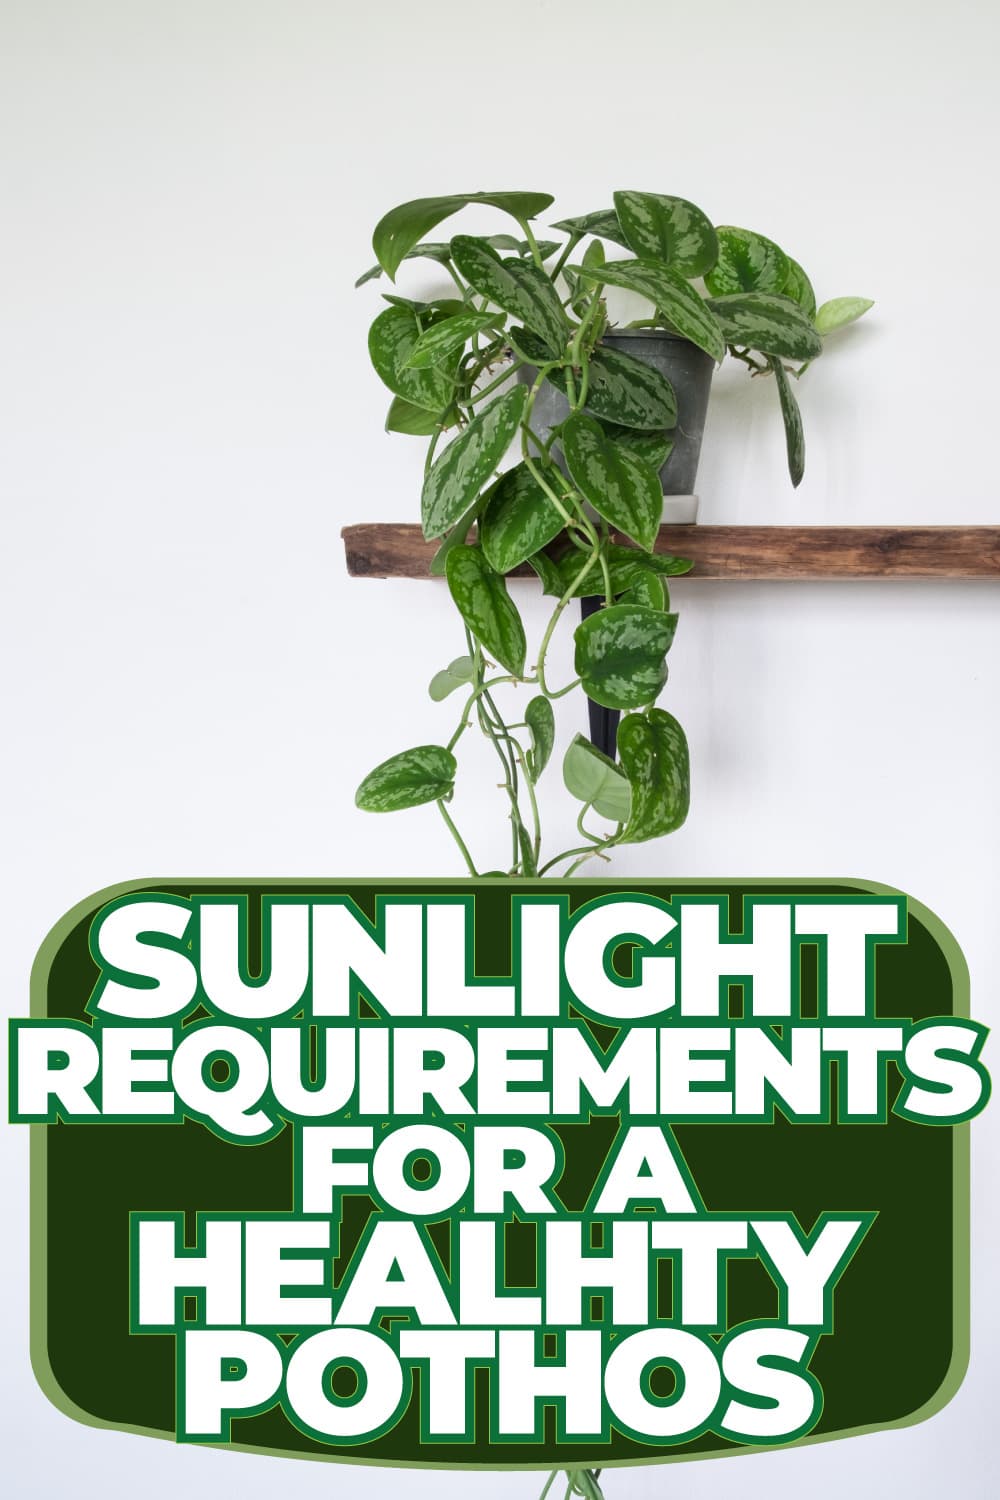 Sunlight Requirements For A Healthy Pothos